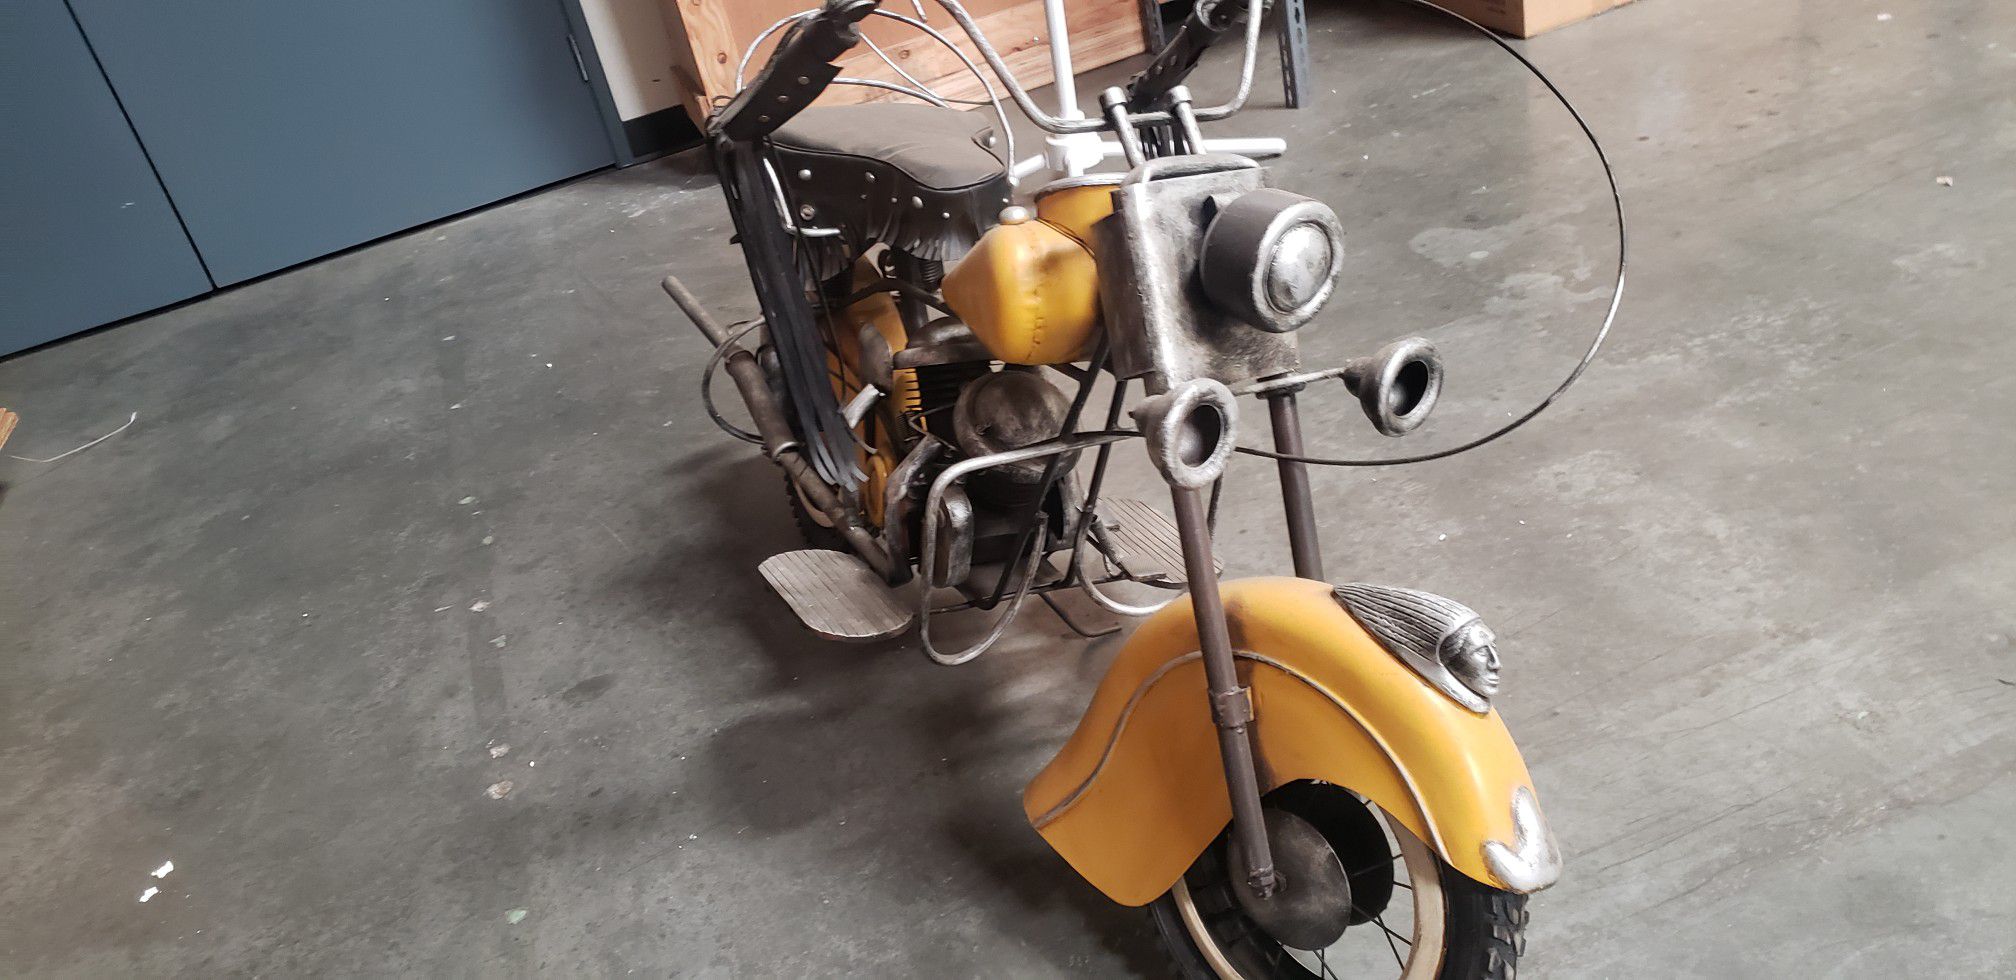 Indian Chief Head Motorcycle (model)